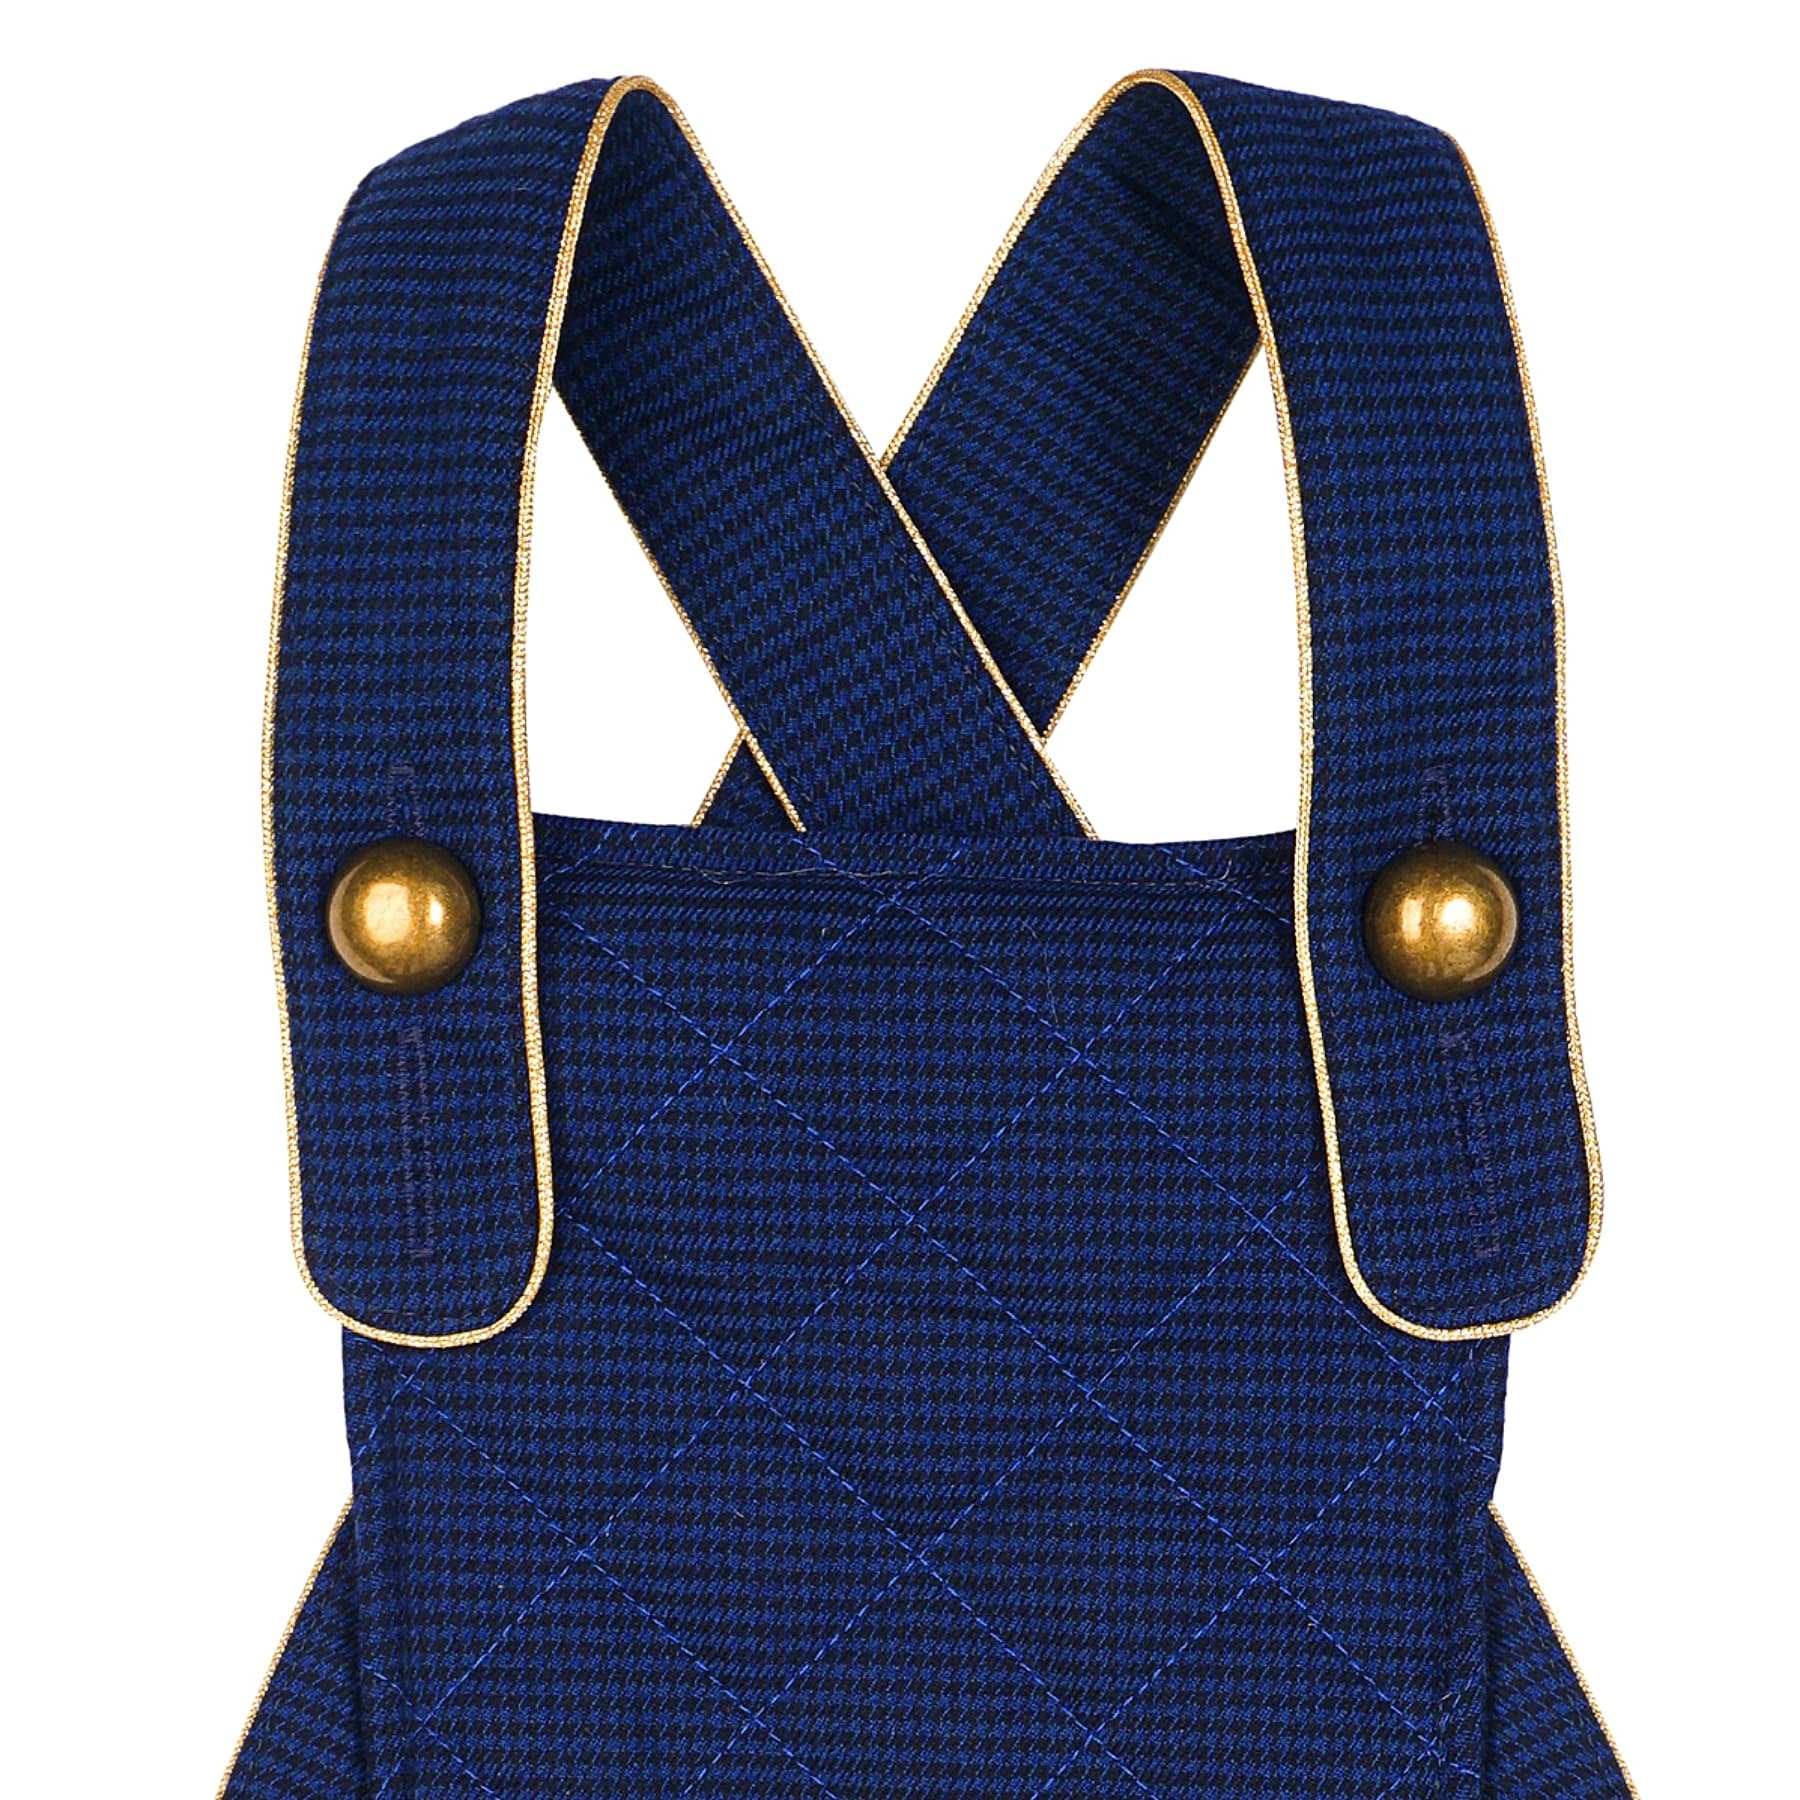 Navy blue houndstooth wool short suit with gold bias for girls from the children's fashion brand la faute a voltaire